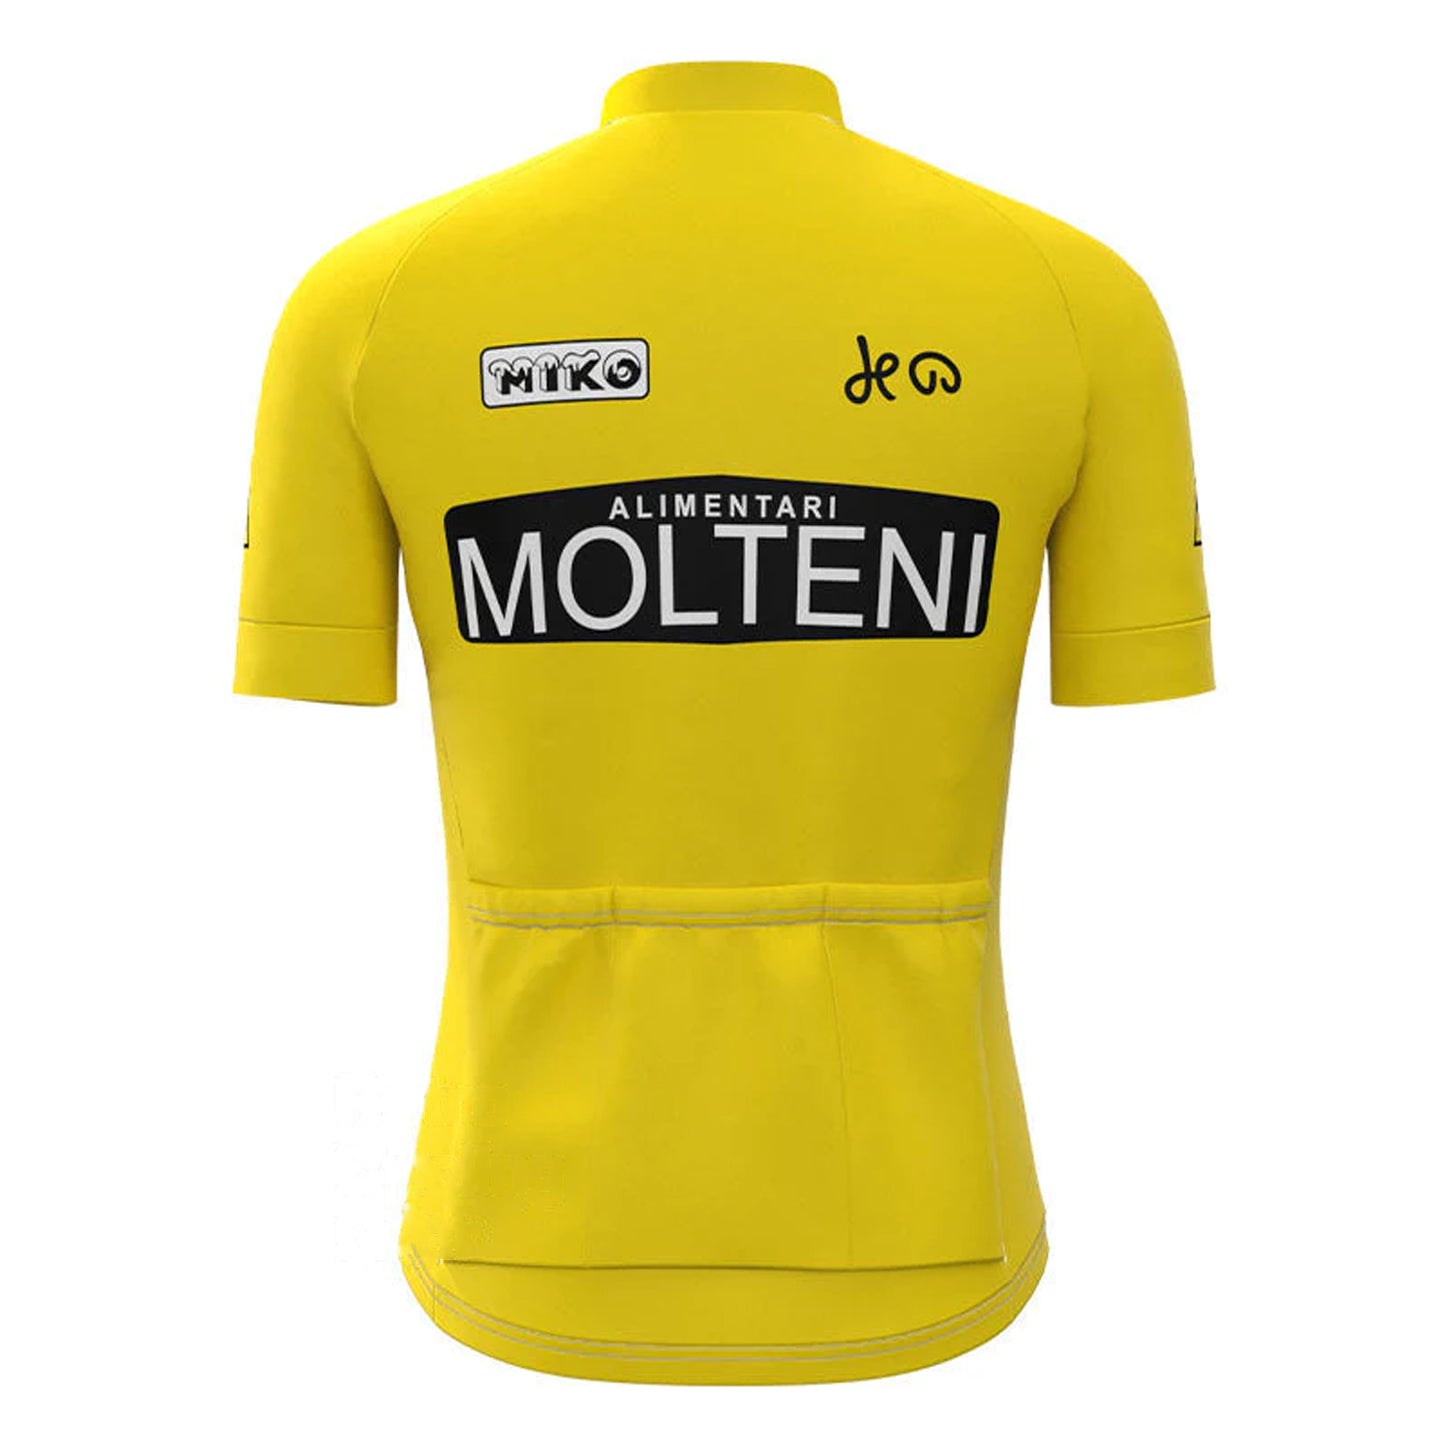 Molteni Yellow Vintage Short Sleeve Cycling Jersey Top